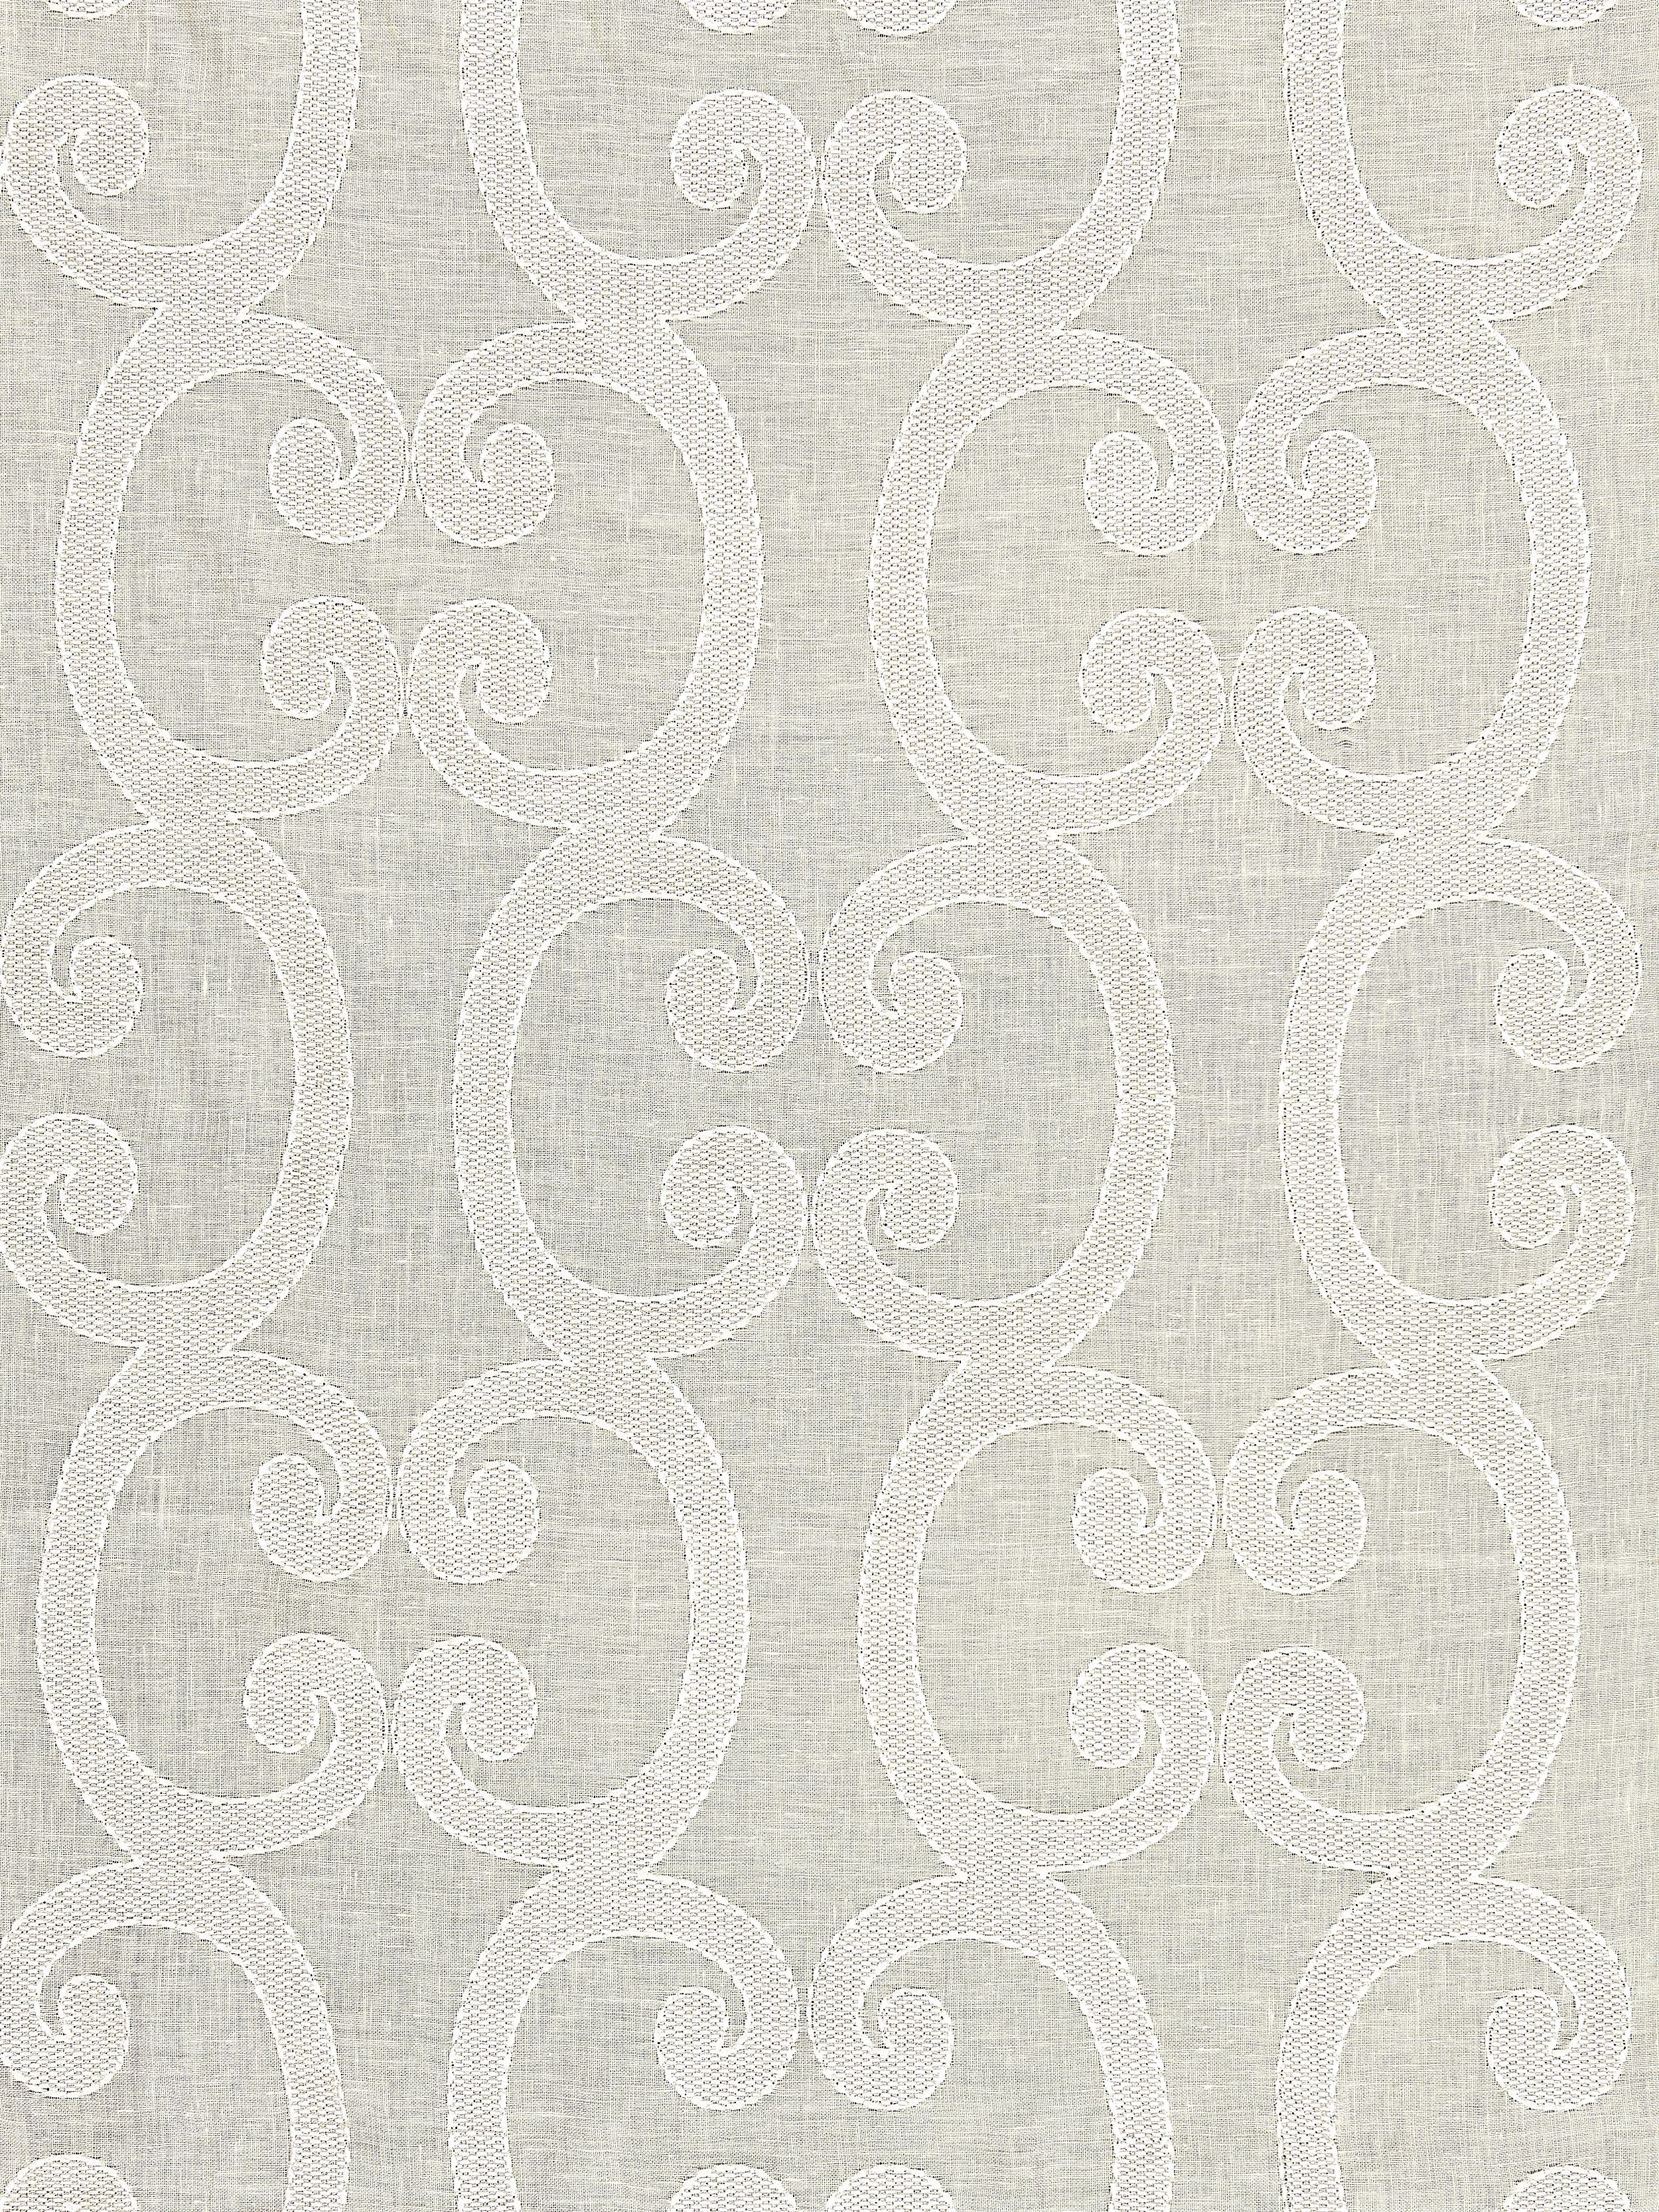 Ornamento Sheer fabric in champagne color - pattern number SC 000227040 - by Scalamandre in the Scalamandre Fabrics Book 1 collection